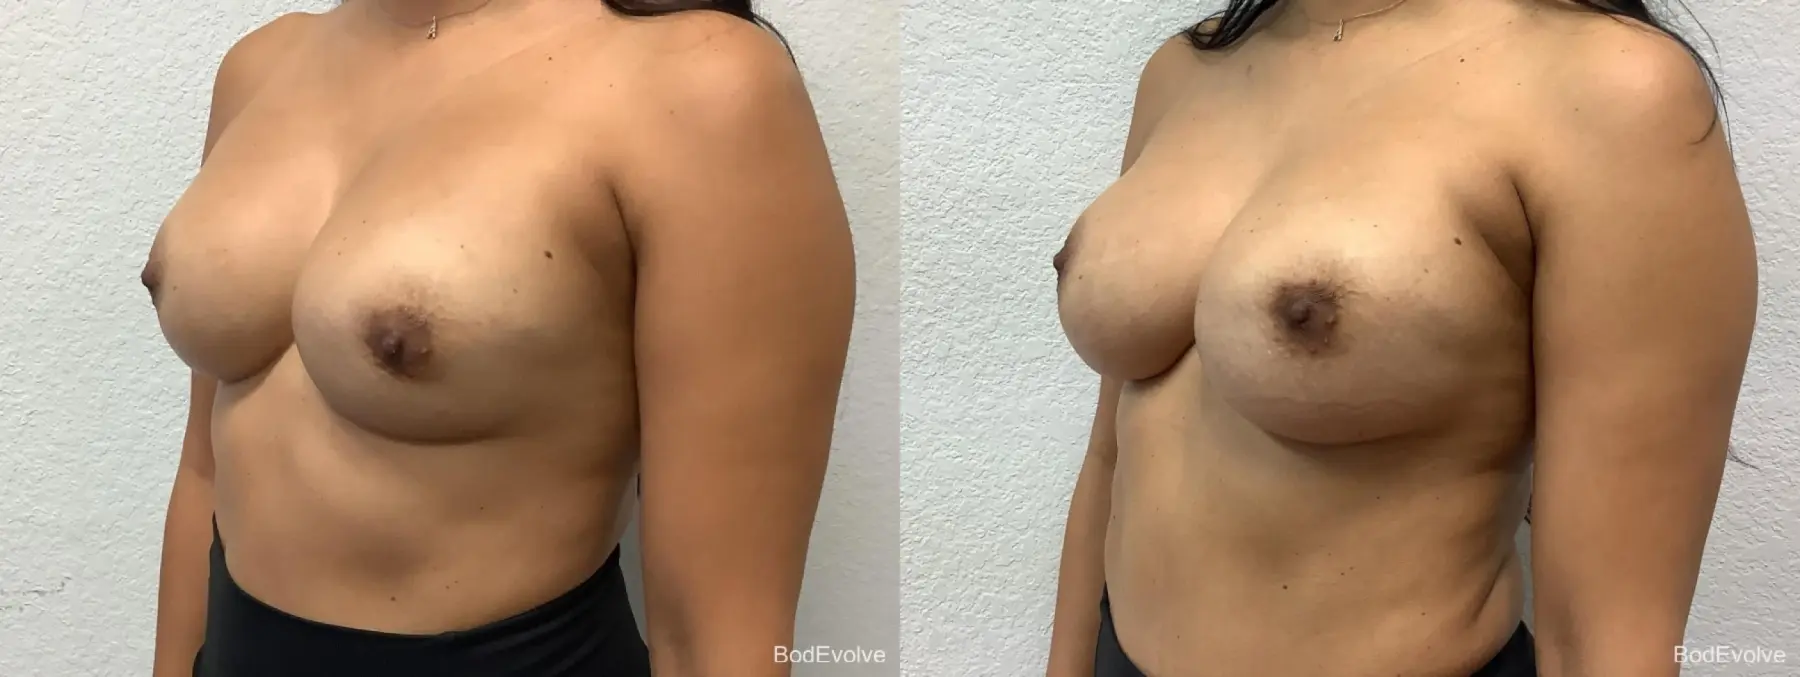 Breast Revision: Patient 2 - Before and After 2